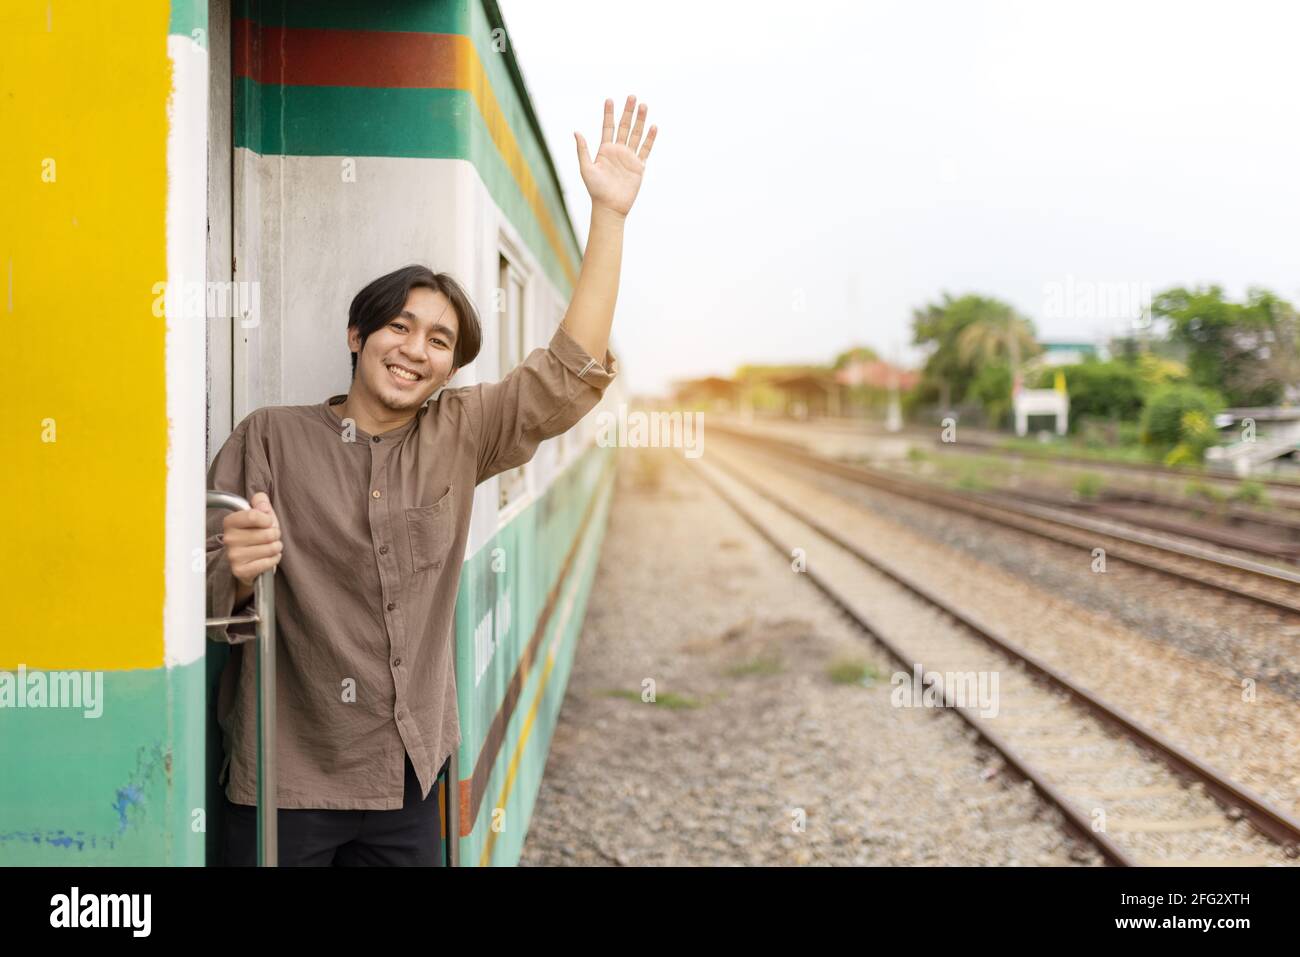 handsome-young-asian-man-hand-to-say-hello-or-goodbye-to-friend-on-train-waving-goodbye-2FG2XTH.jpg